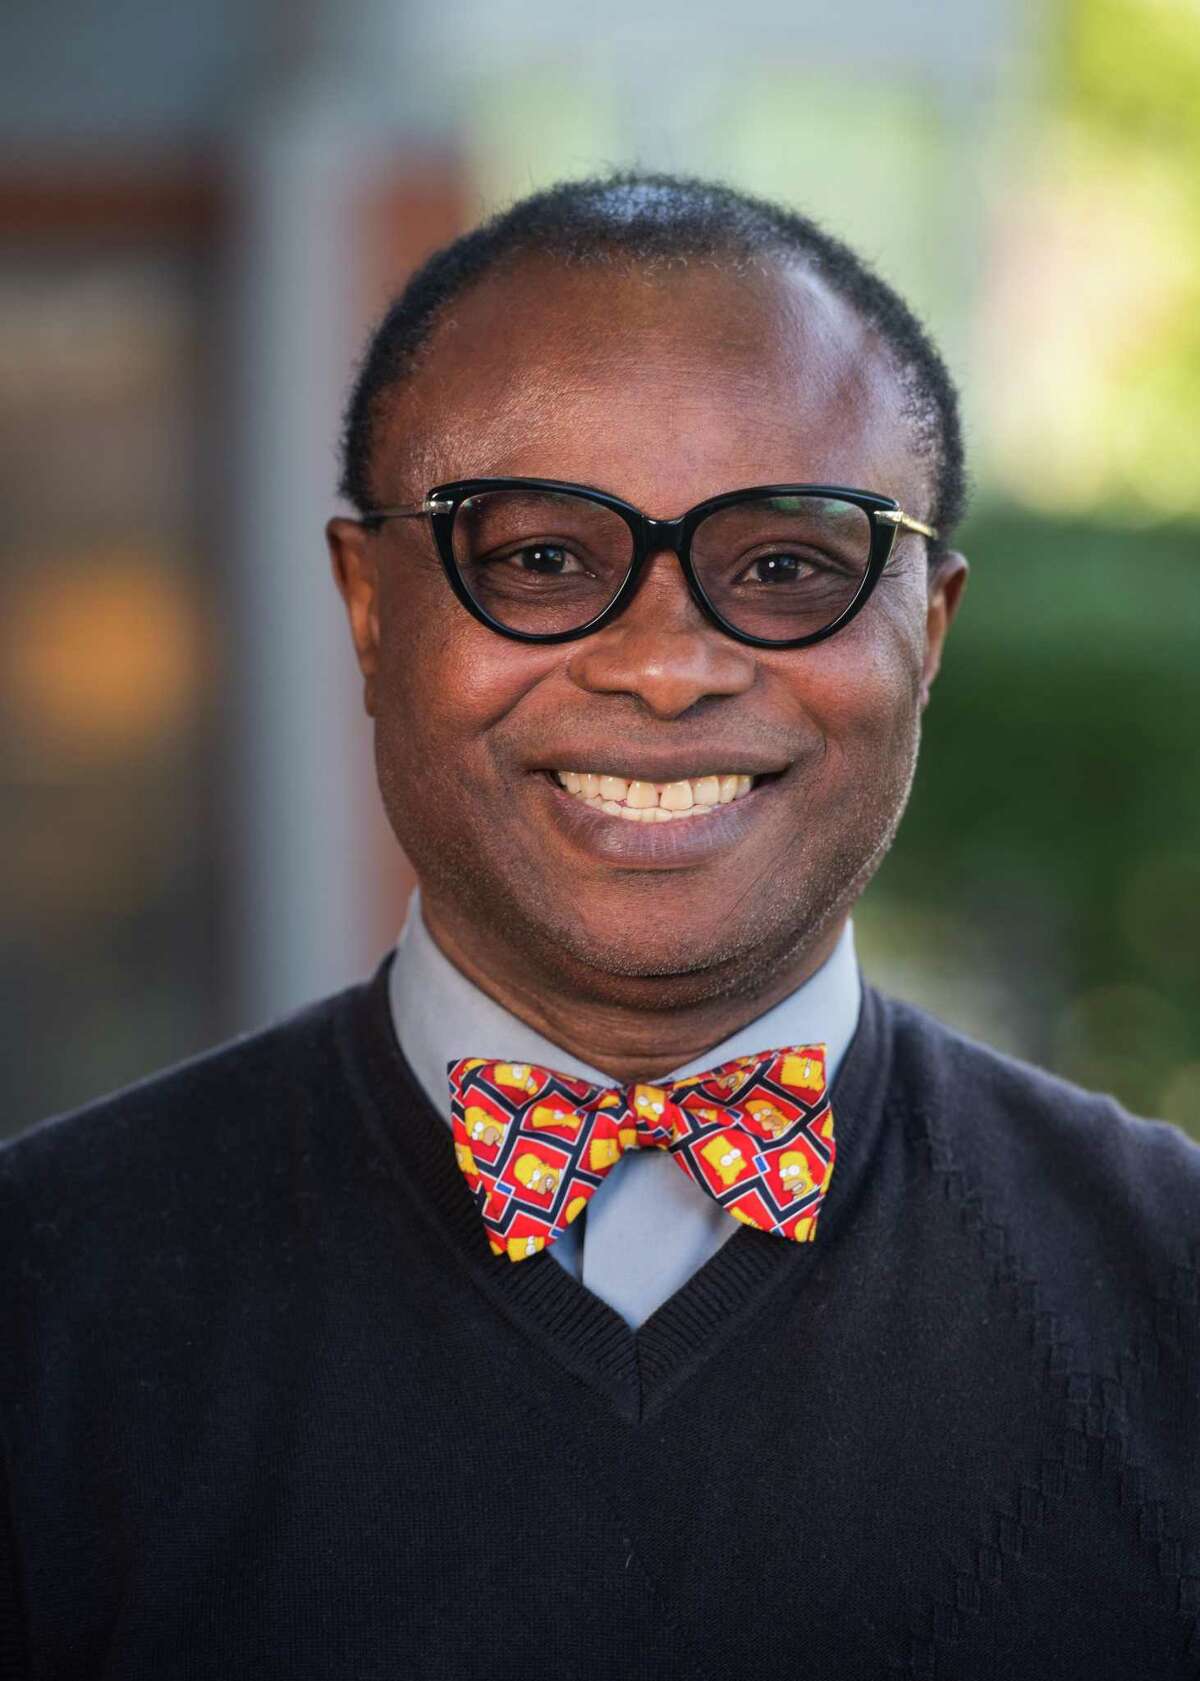 Dr. John Nwangwu, a professor of public health at Southern Connecticut State University